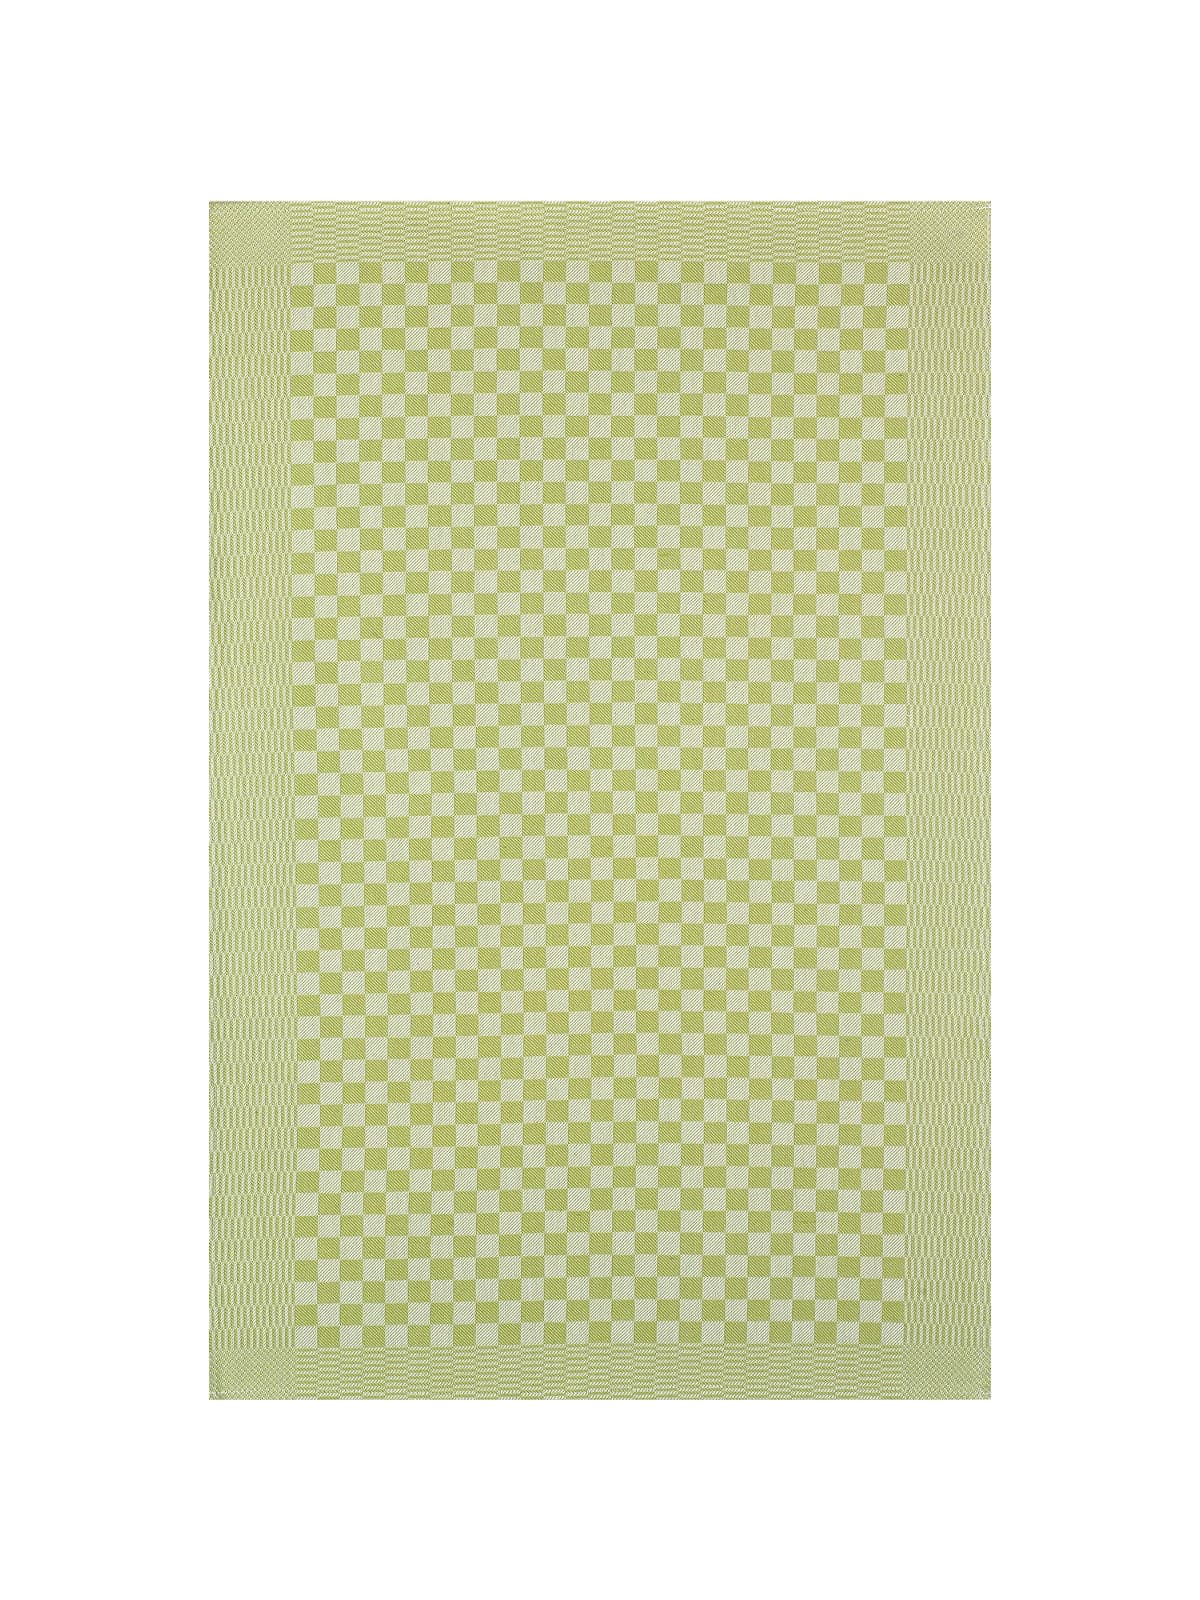 Pit Towel Green - 12 Pcs by Kitchen & Table Linens -  ChefsCotton